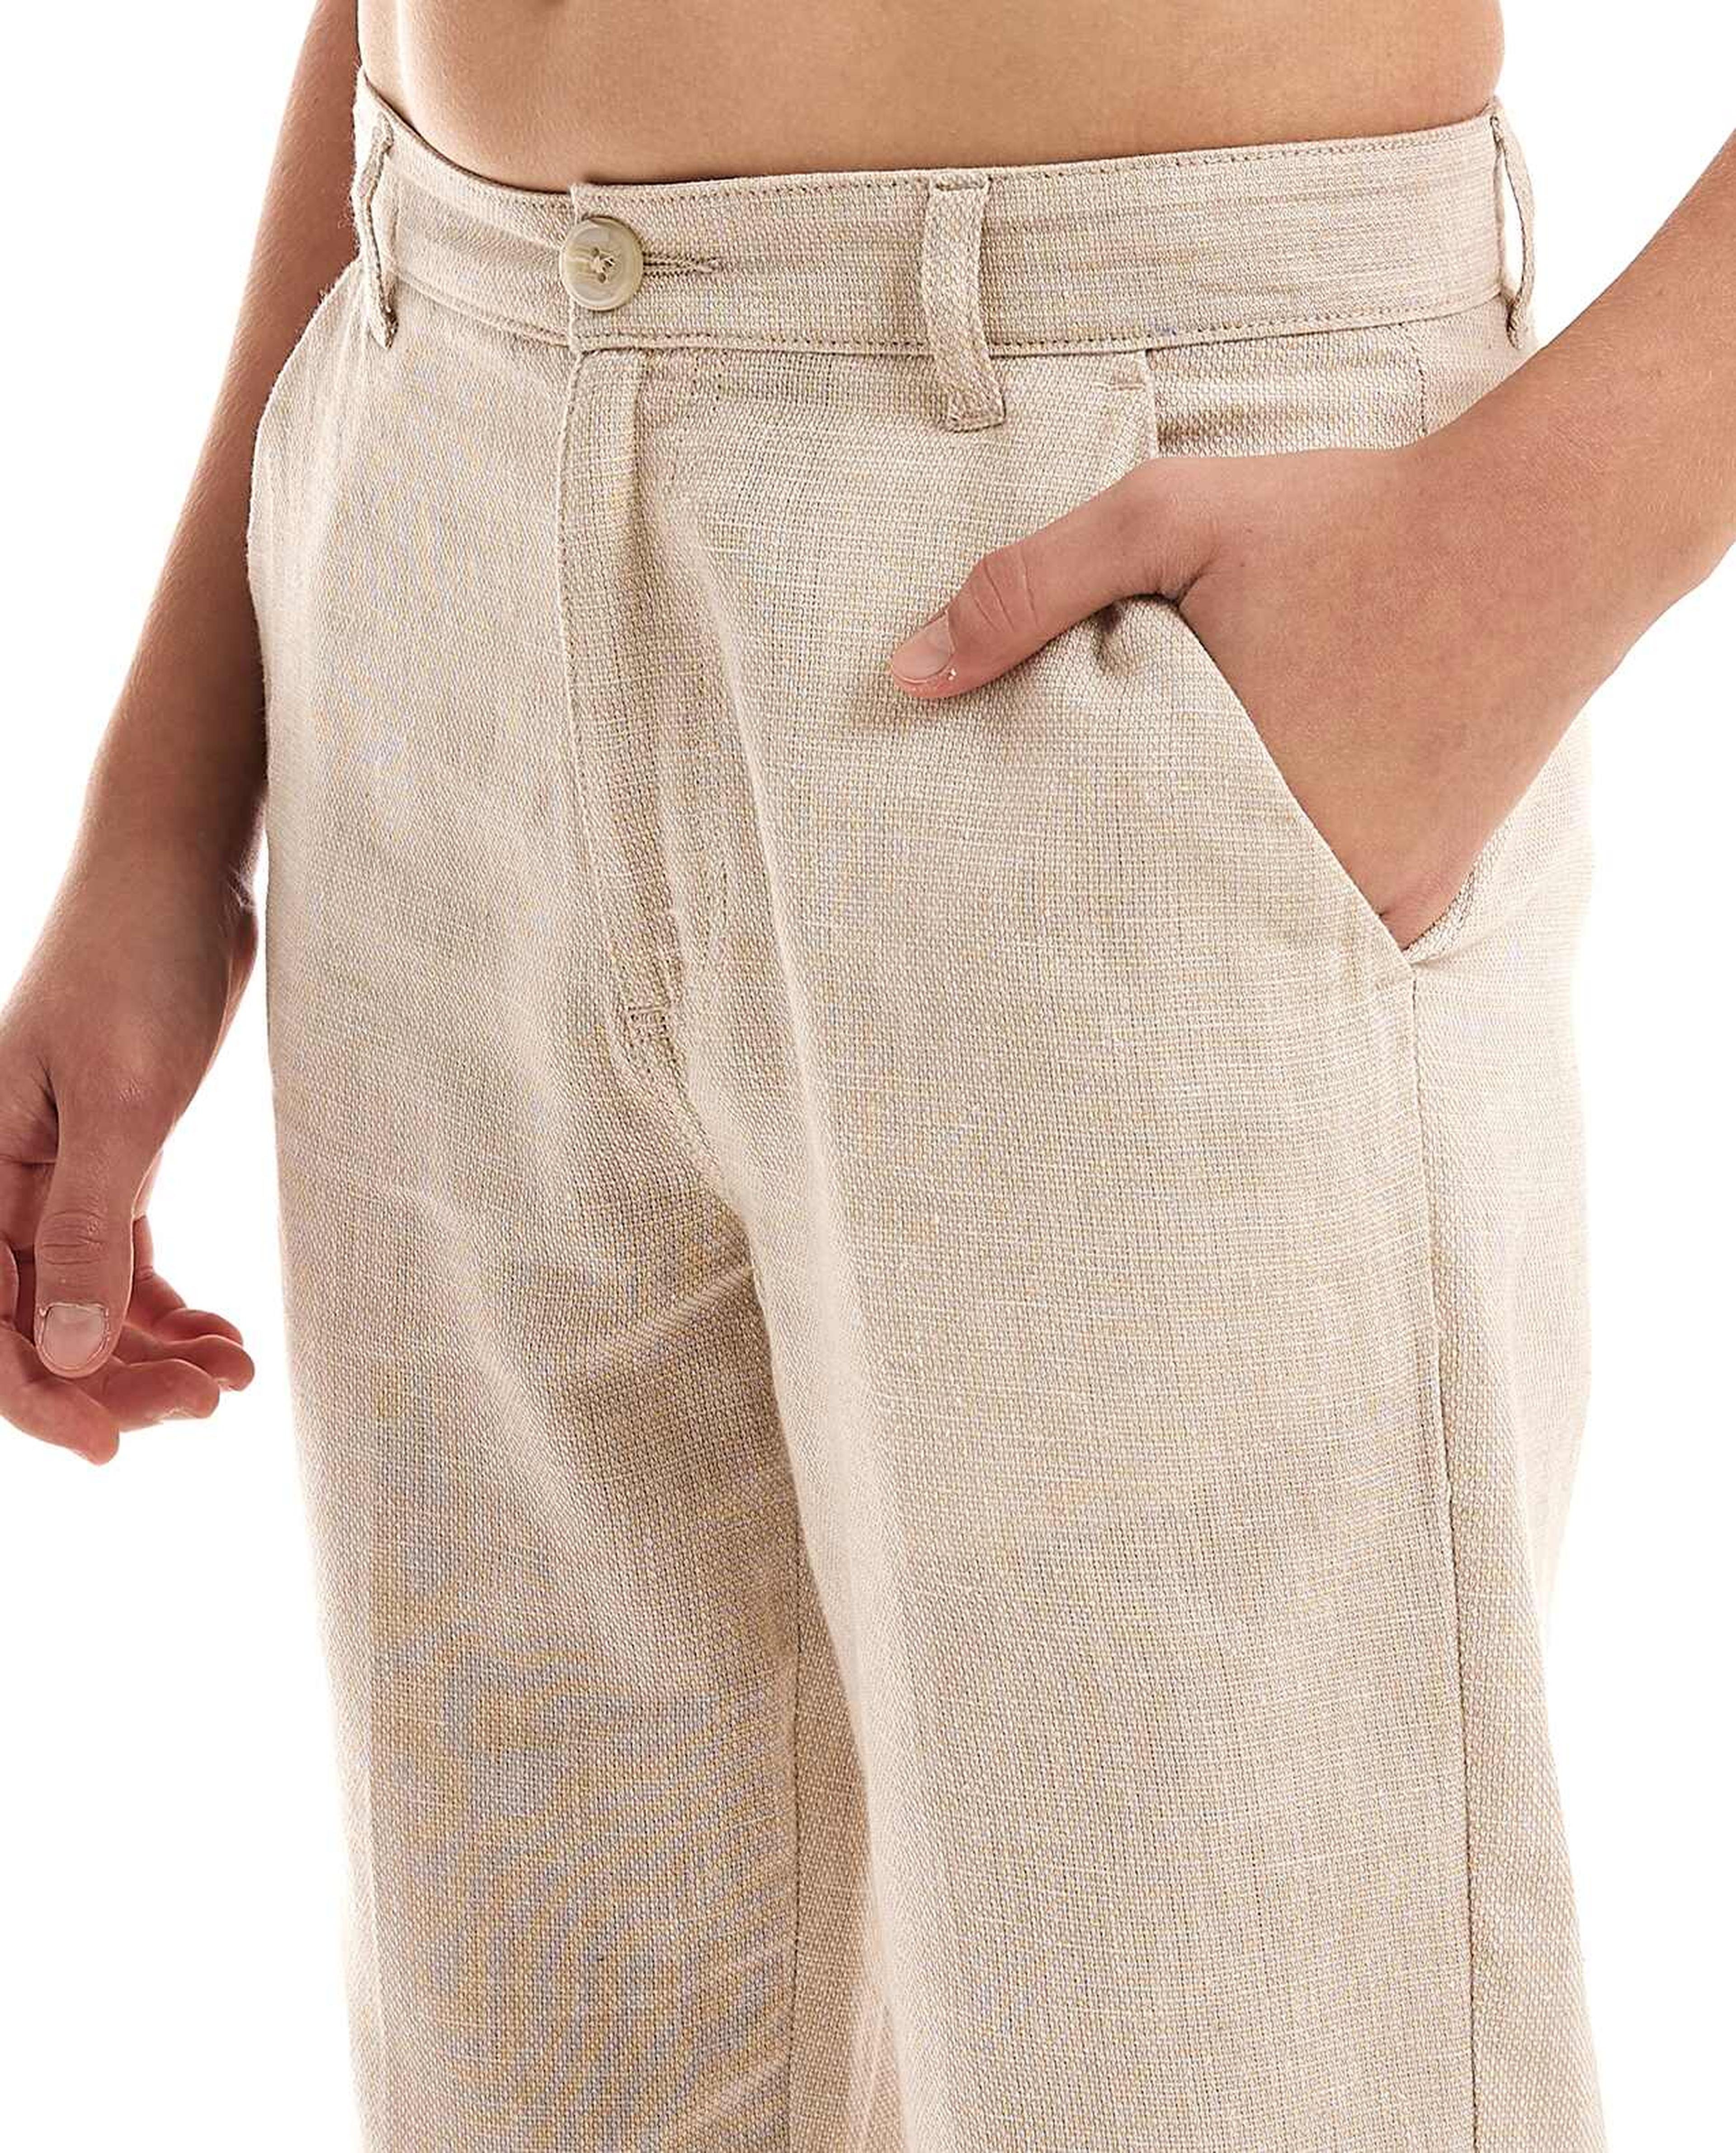 Woven Straight Fit Pants with Button Closure